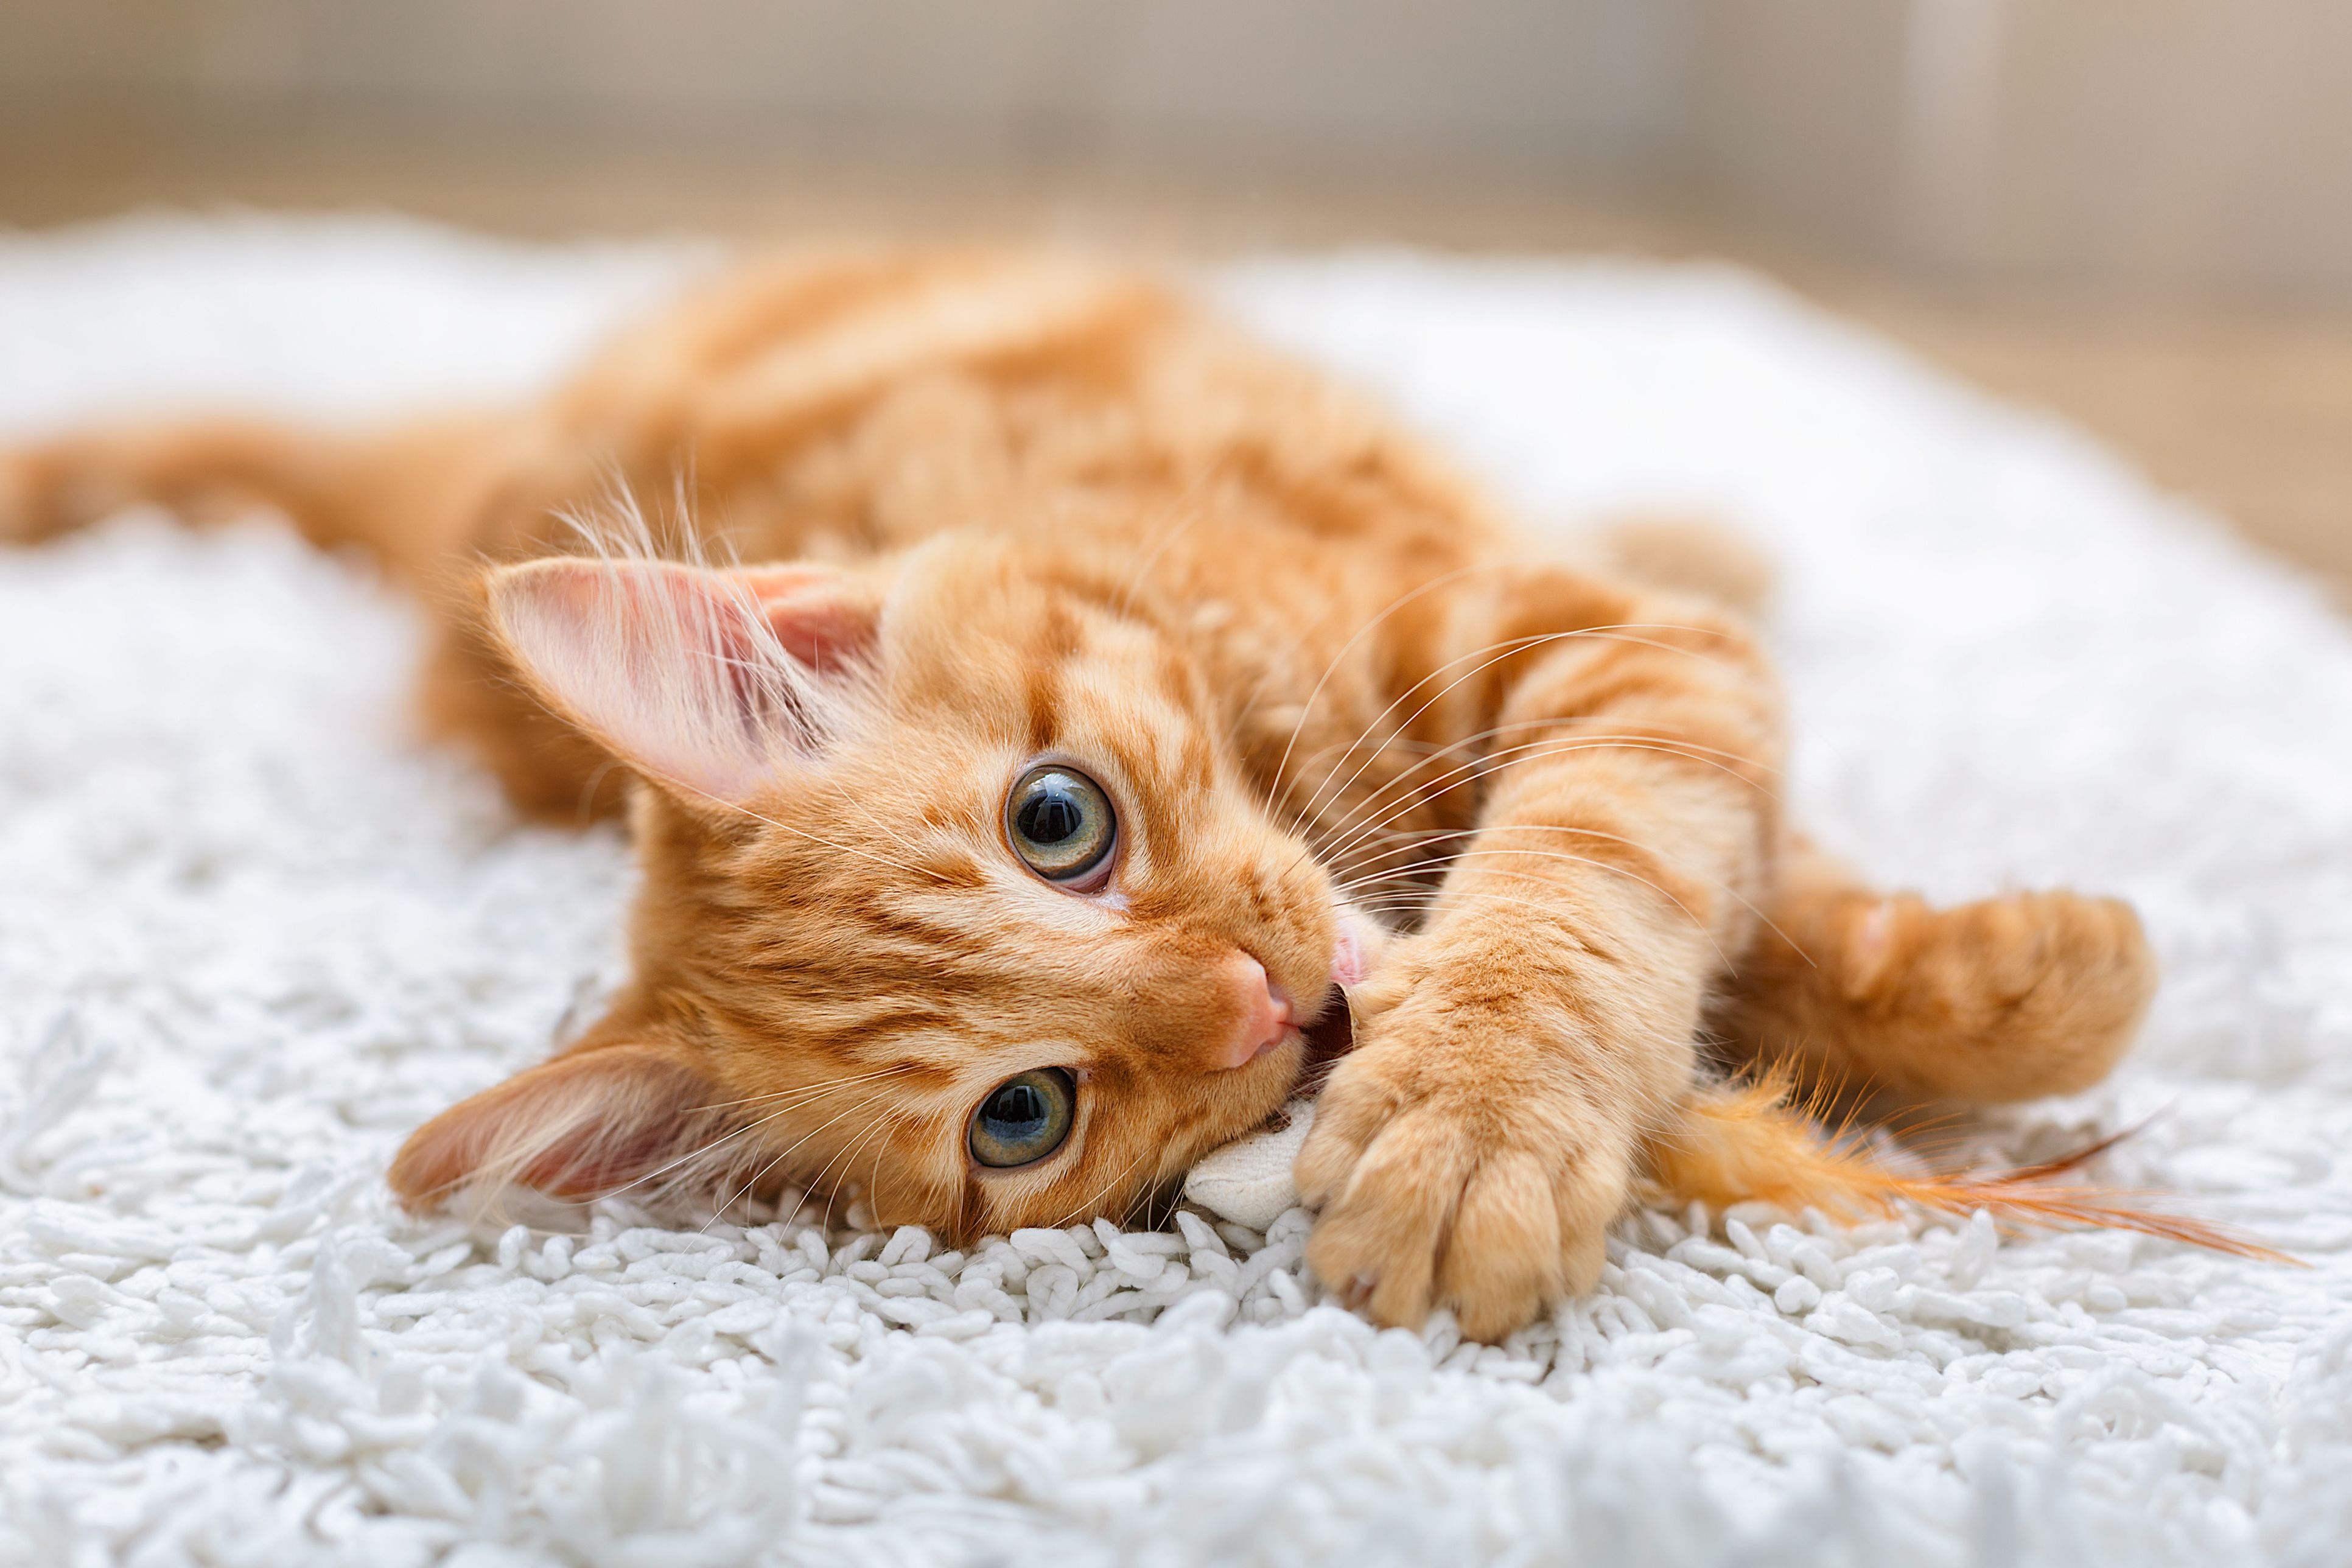 Top 100 Cats Cute Names For Your Adorable Feline Friends